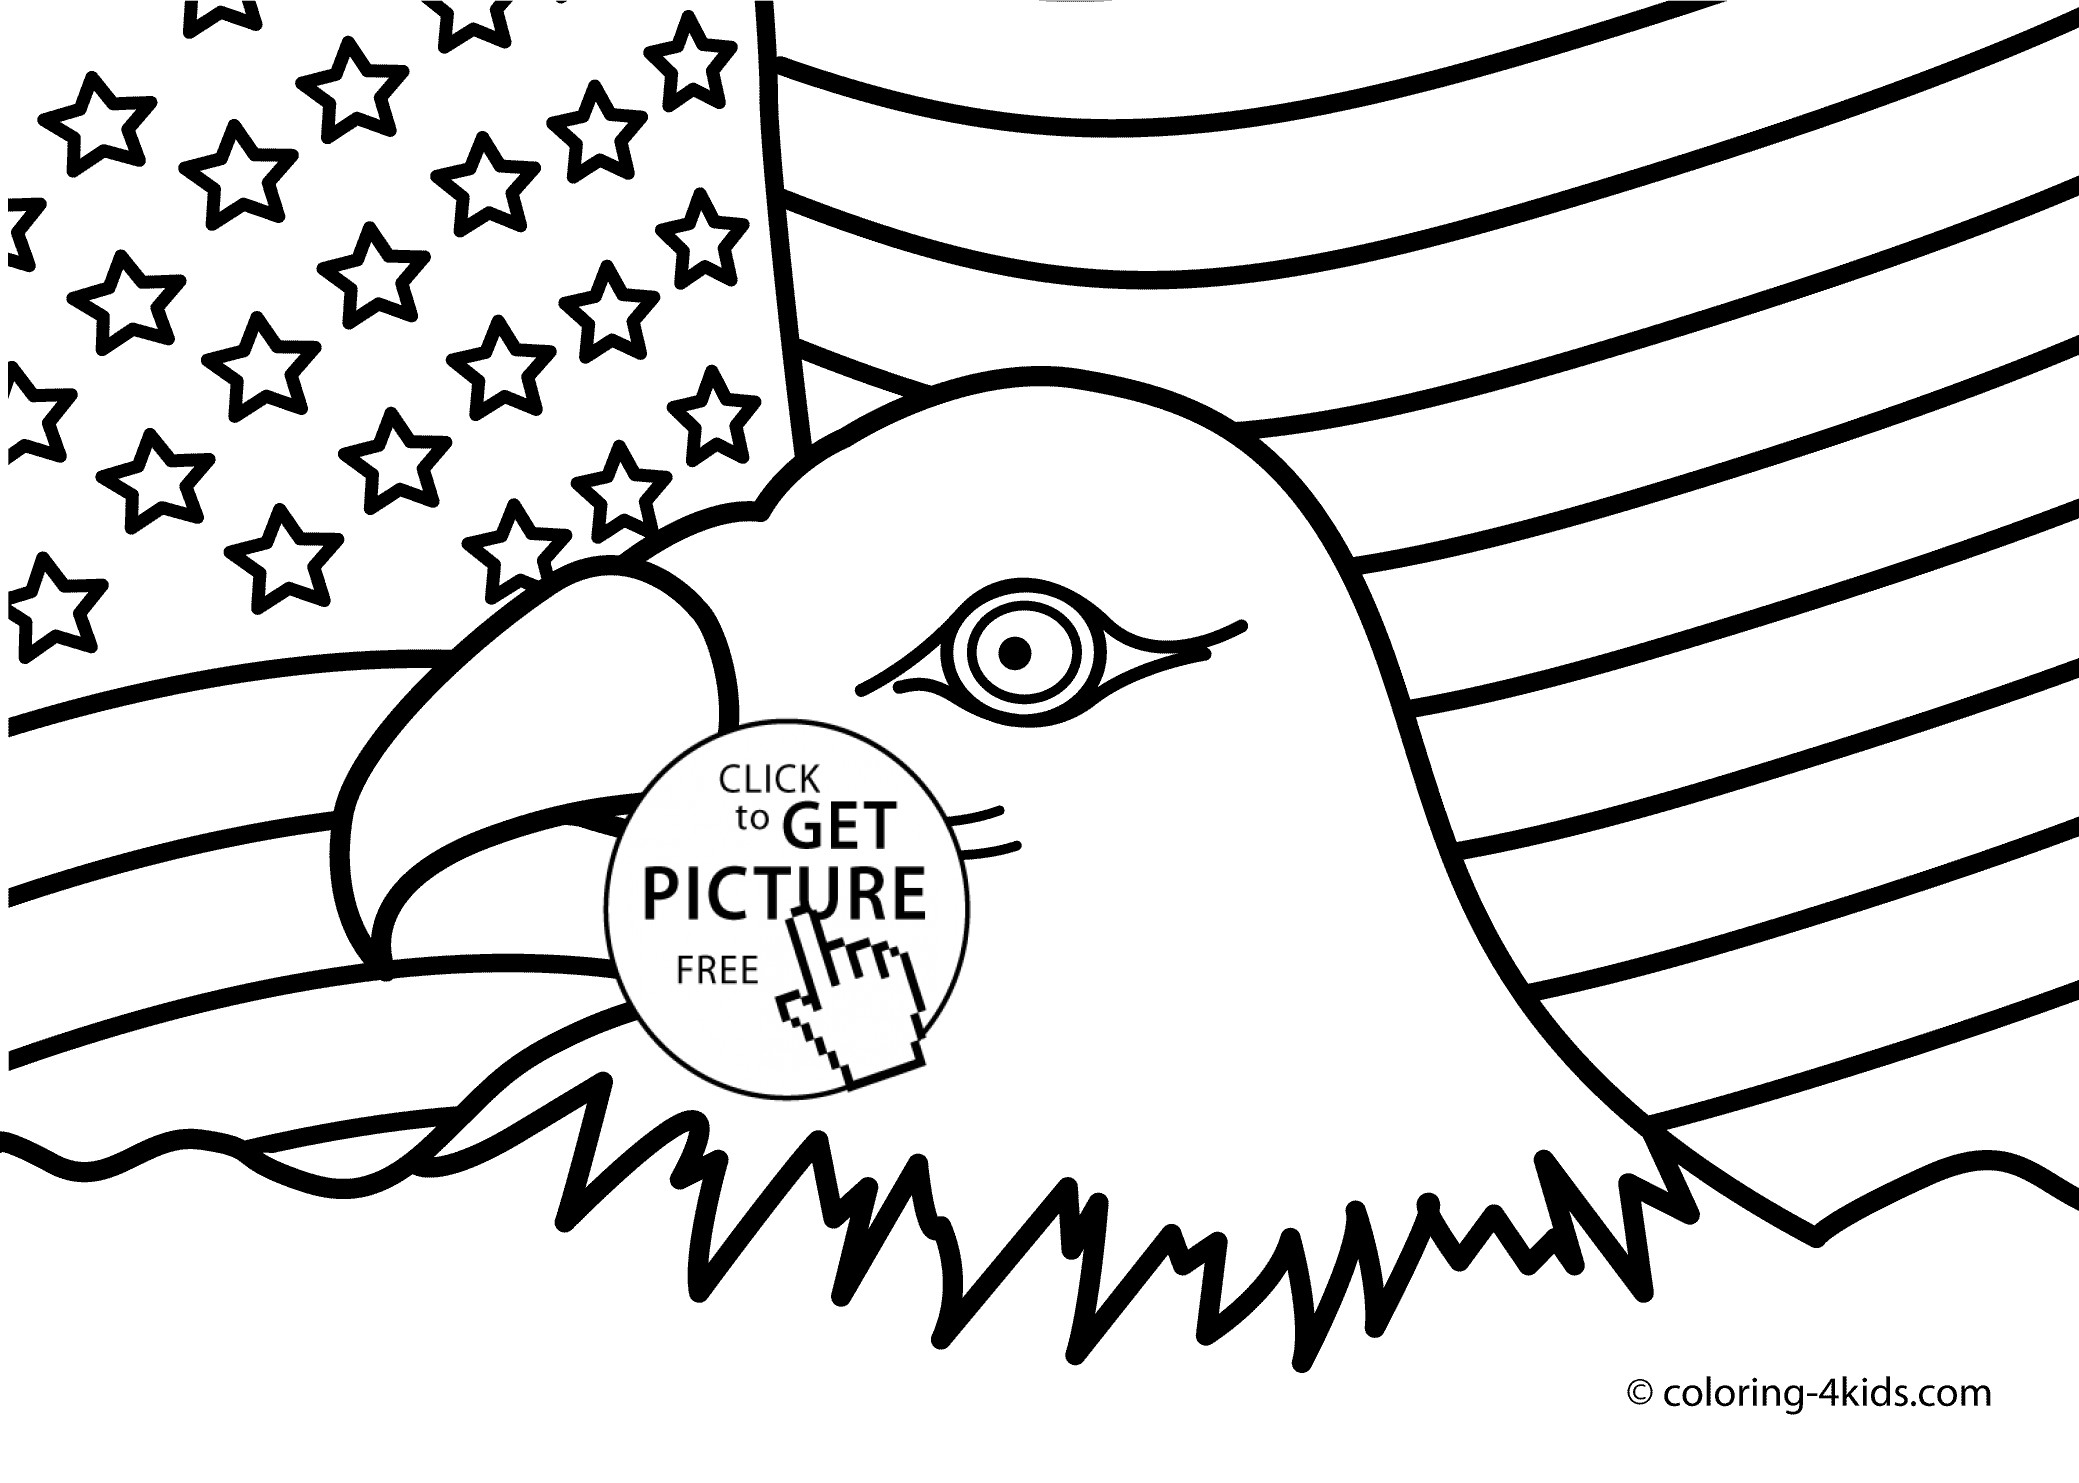 Independence Day Coloring Pages Printable
 USA independence day coloring pages for kids July 4